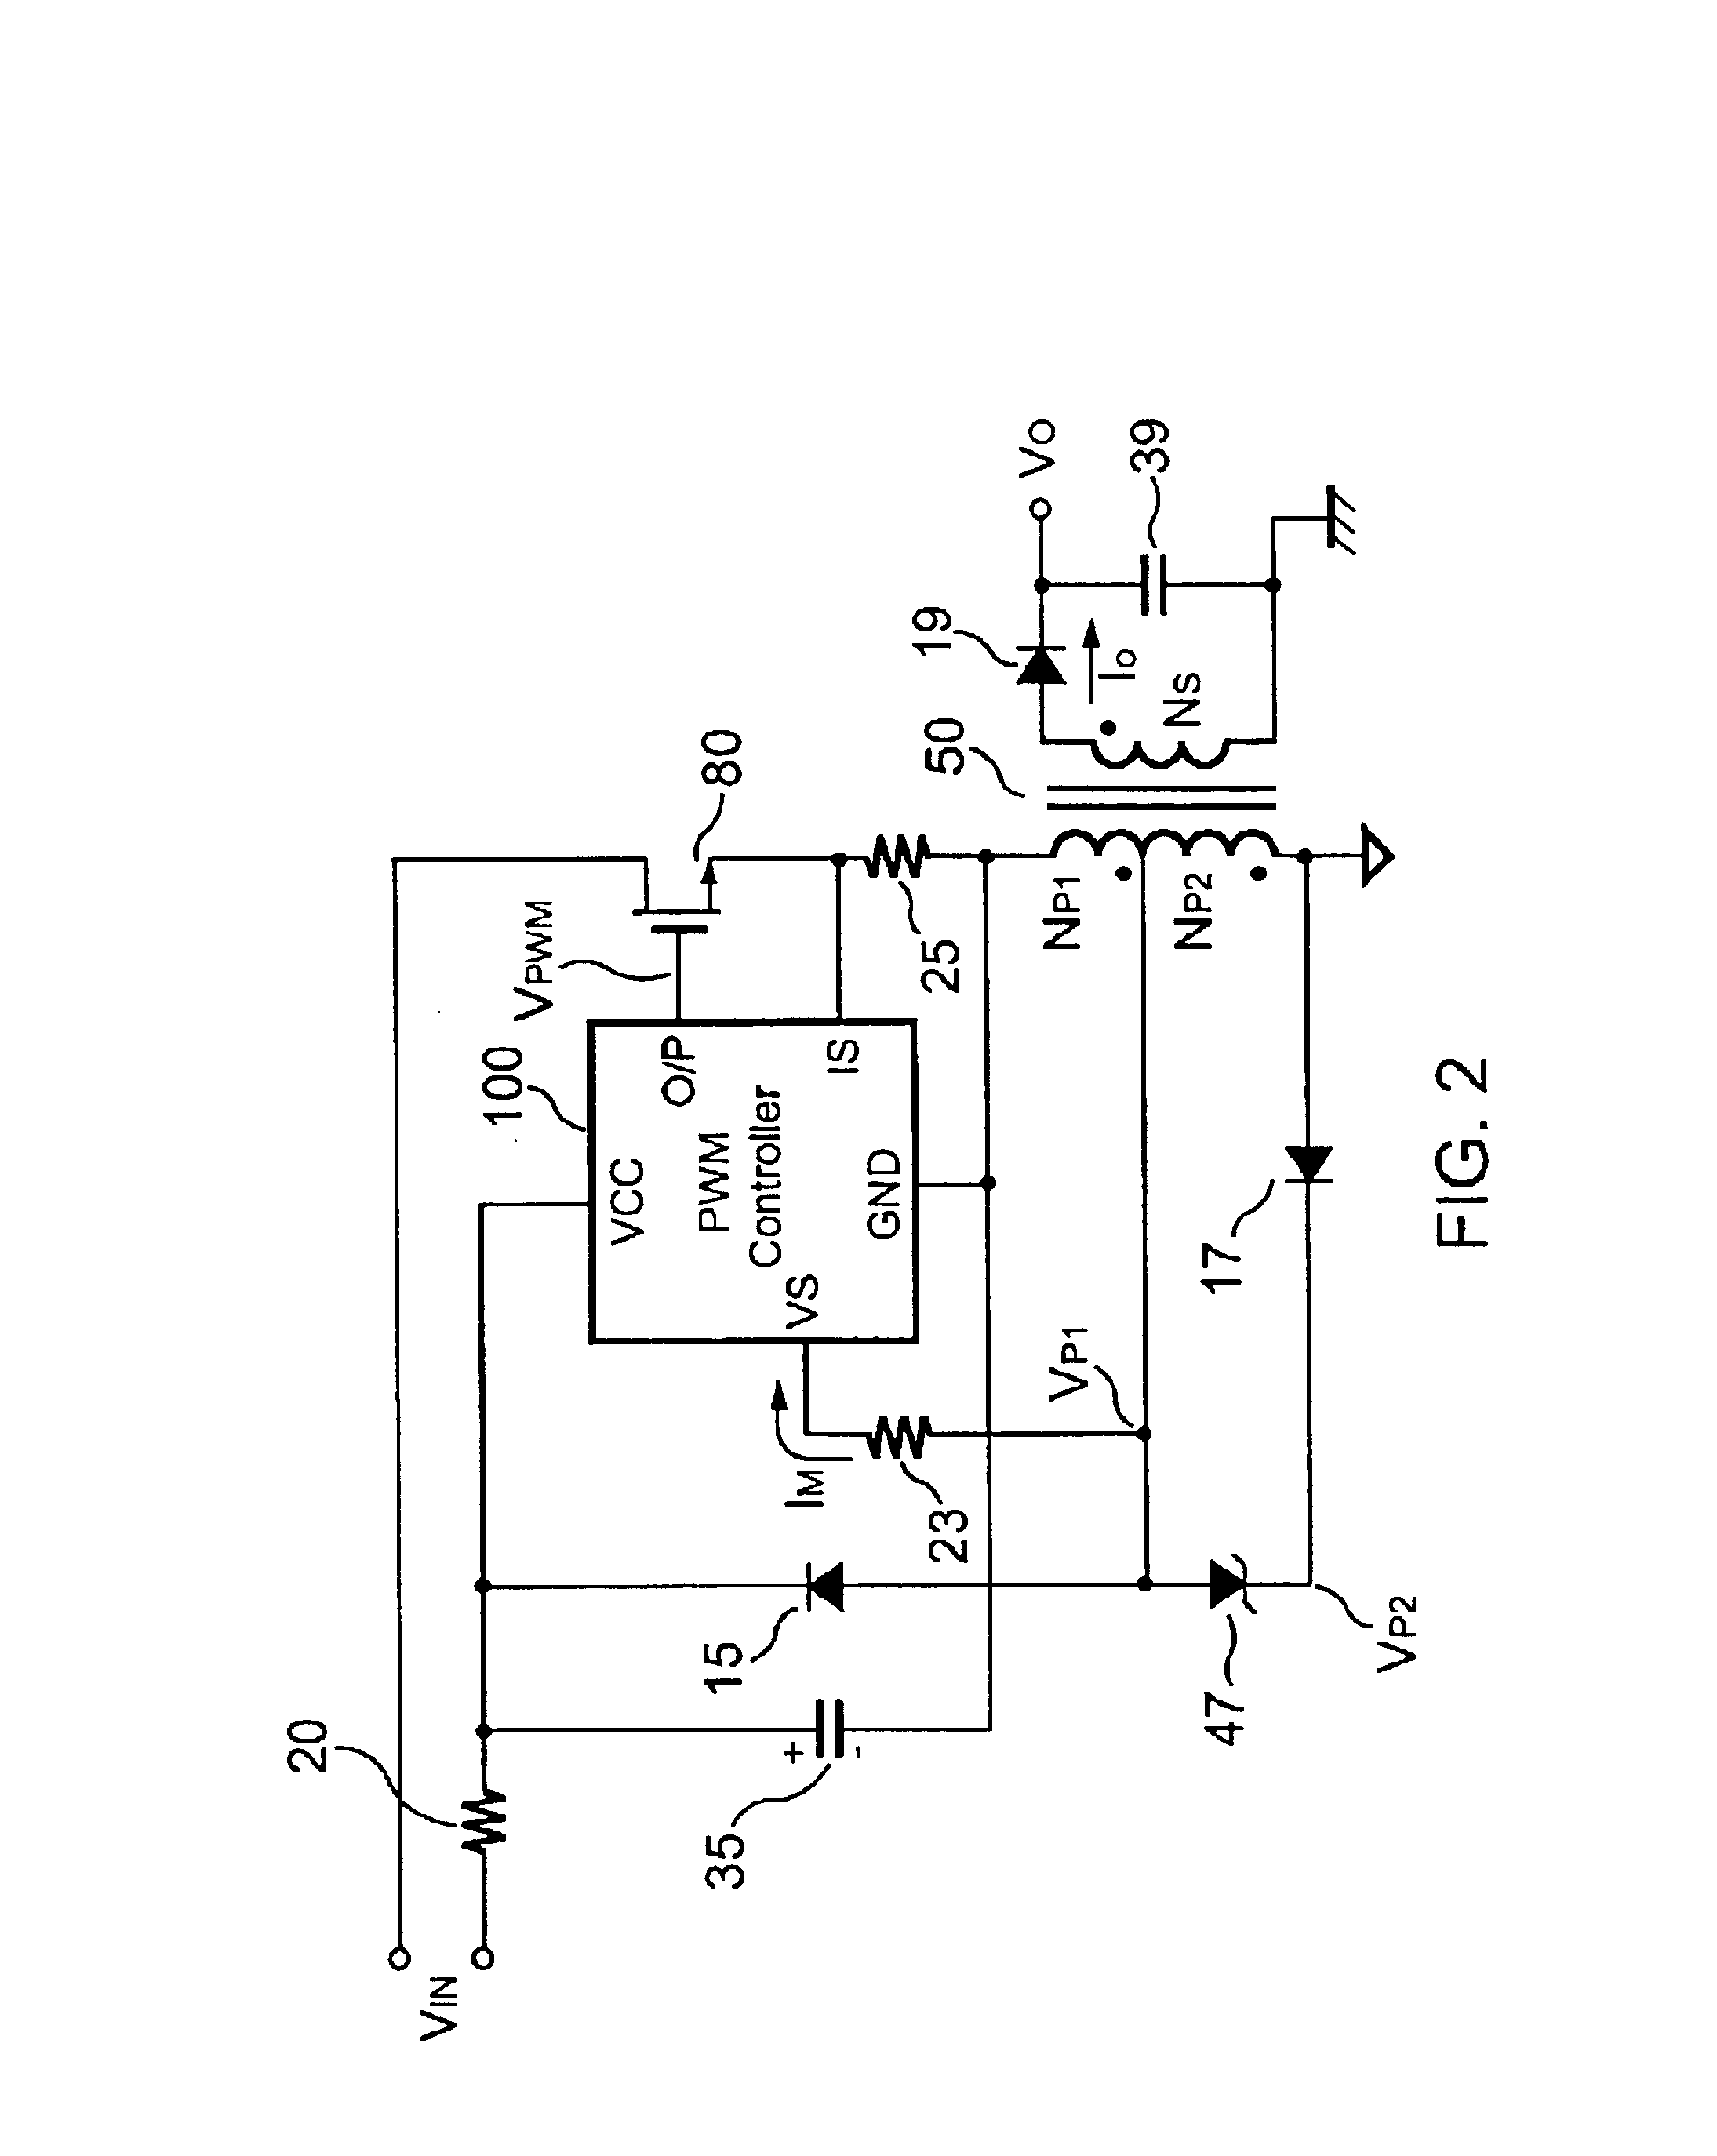 Flyback power converter having a constant voltage and a constant current output under primary-side PWM control